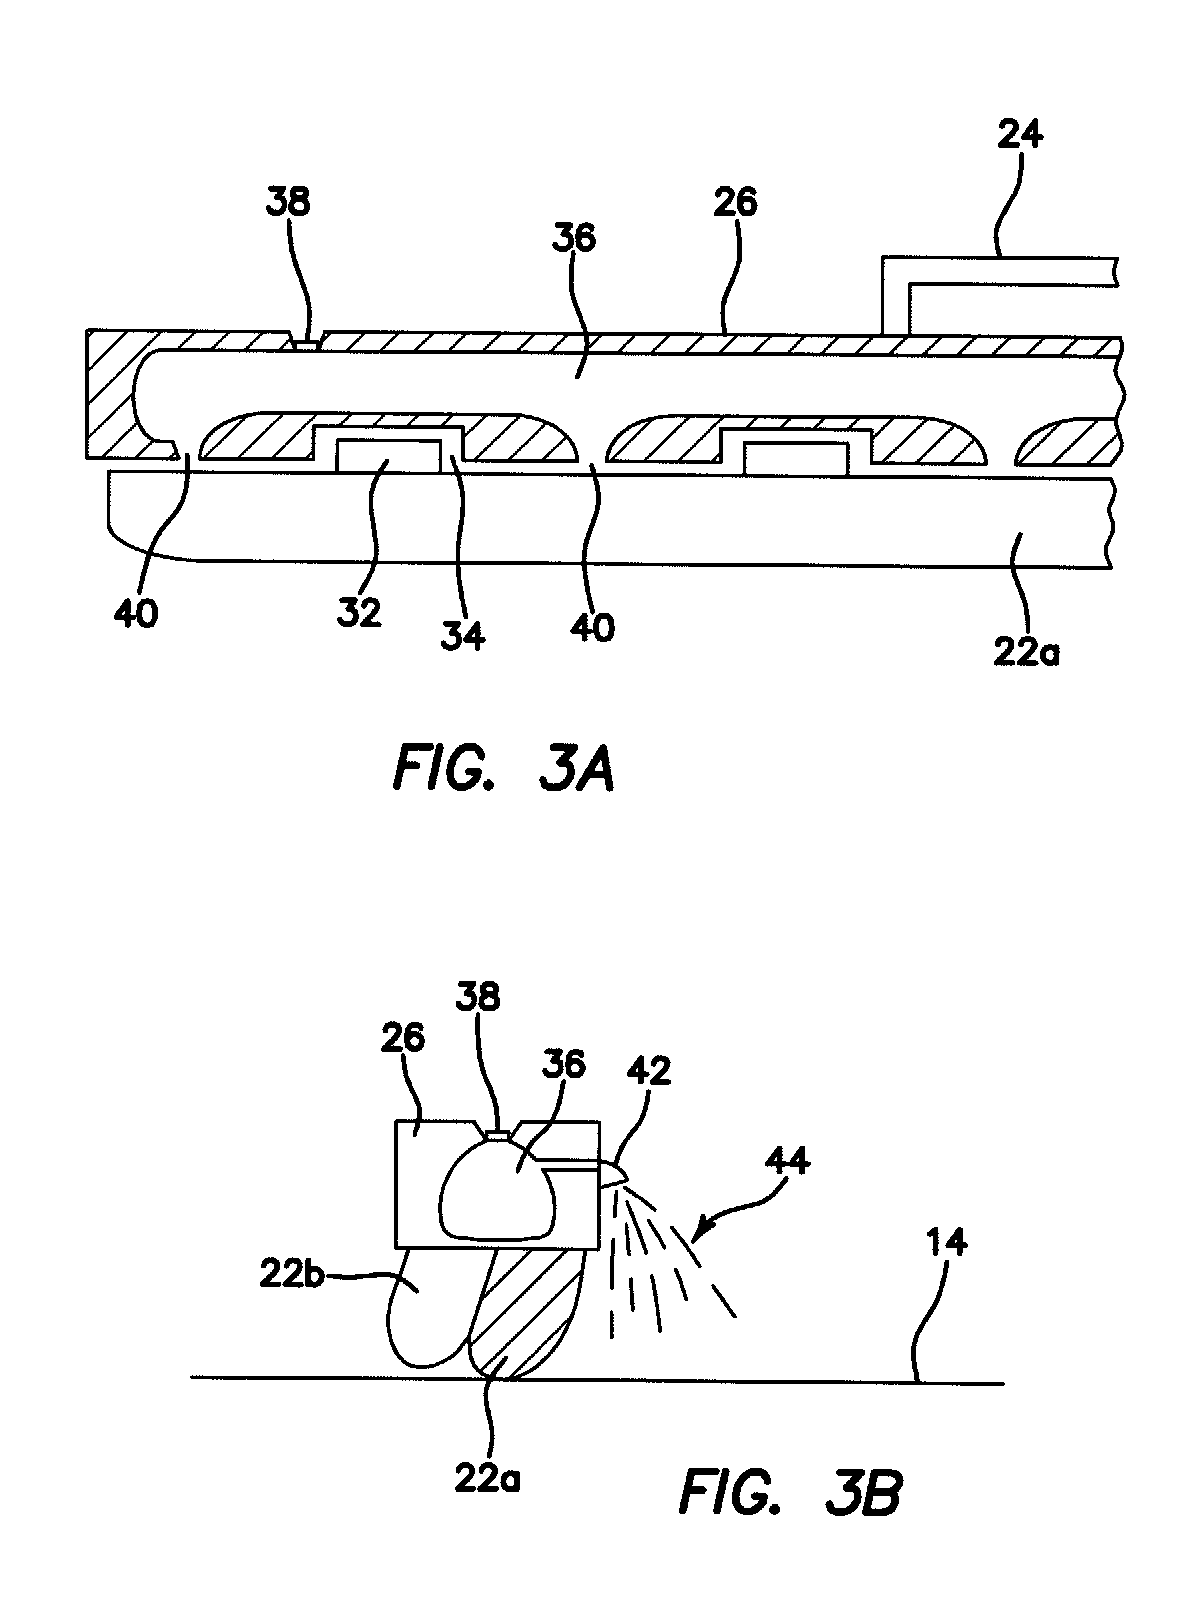 Method and Apparatus for Cleaning A Touch or Display Screen